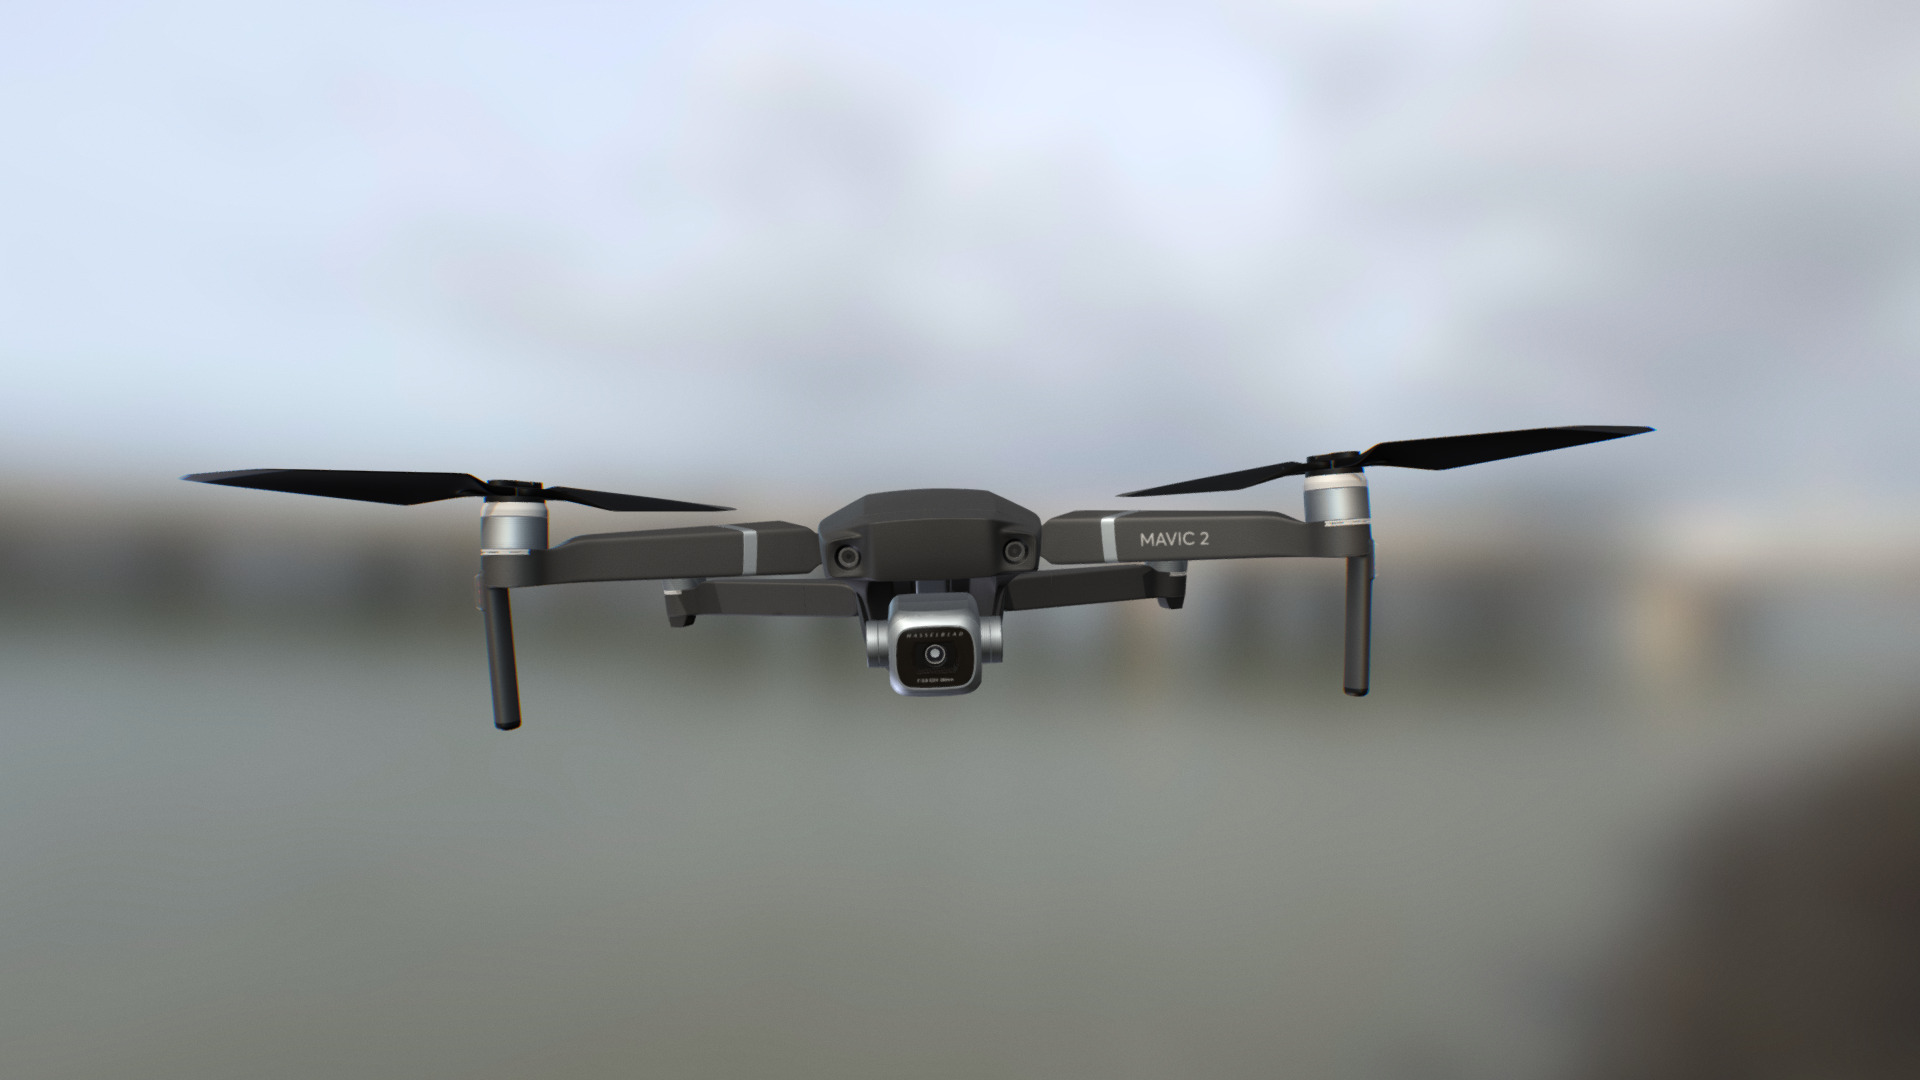 3D model DJI Mavic 2 Pro - This is a 3D model of the DJI Mavic 2 Pro. The 3D model is about a drone flying in the sky.